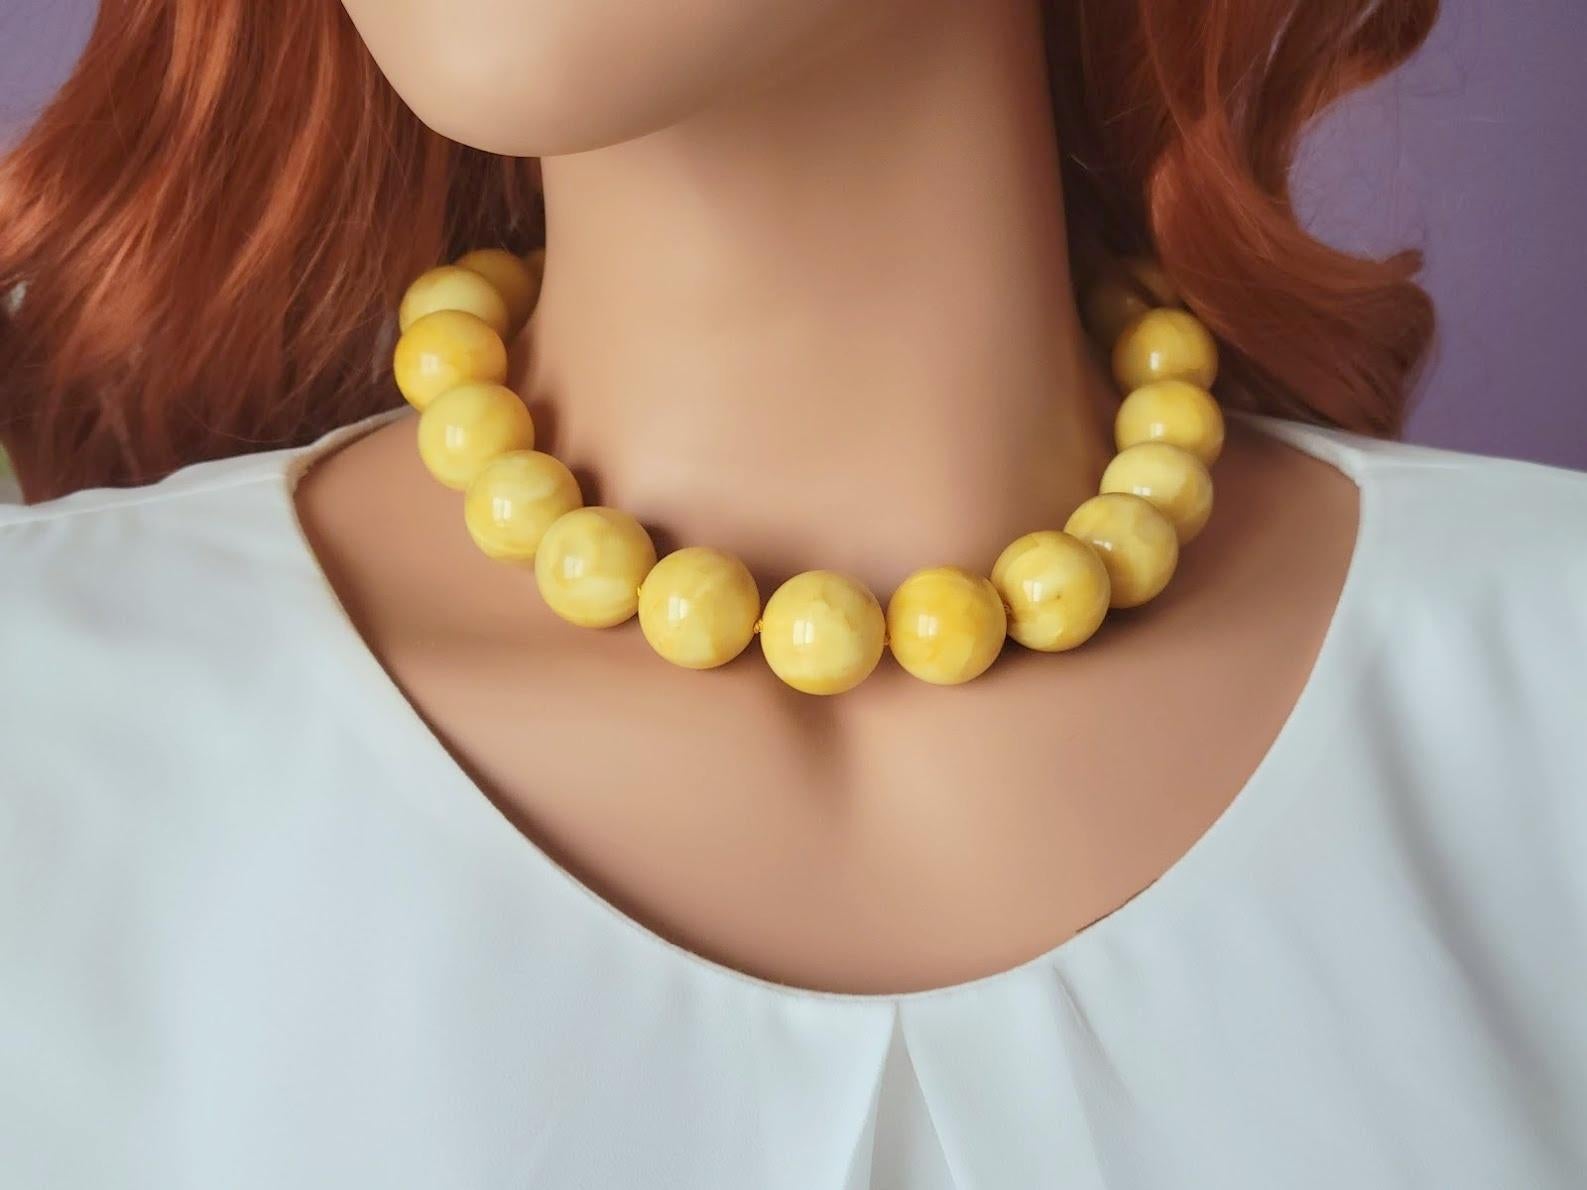 Introducing a one-of-a-kind piece of Baltic amber jewelry that is sure to take your breath away. This necklace is created from rare, colossal-sized round beads that vary in size from 20 to 21mm and measure a total length of 18 inches (45 cm).
The